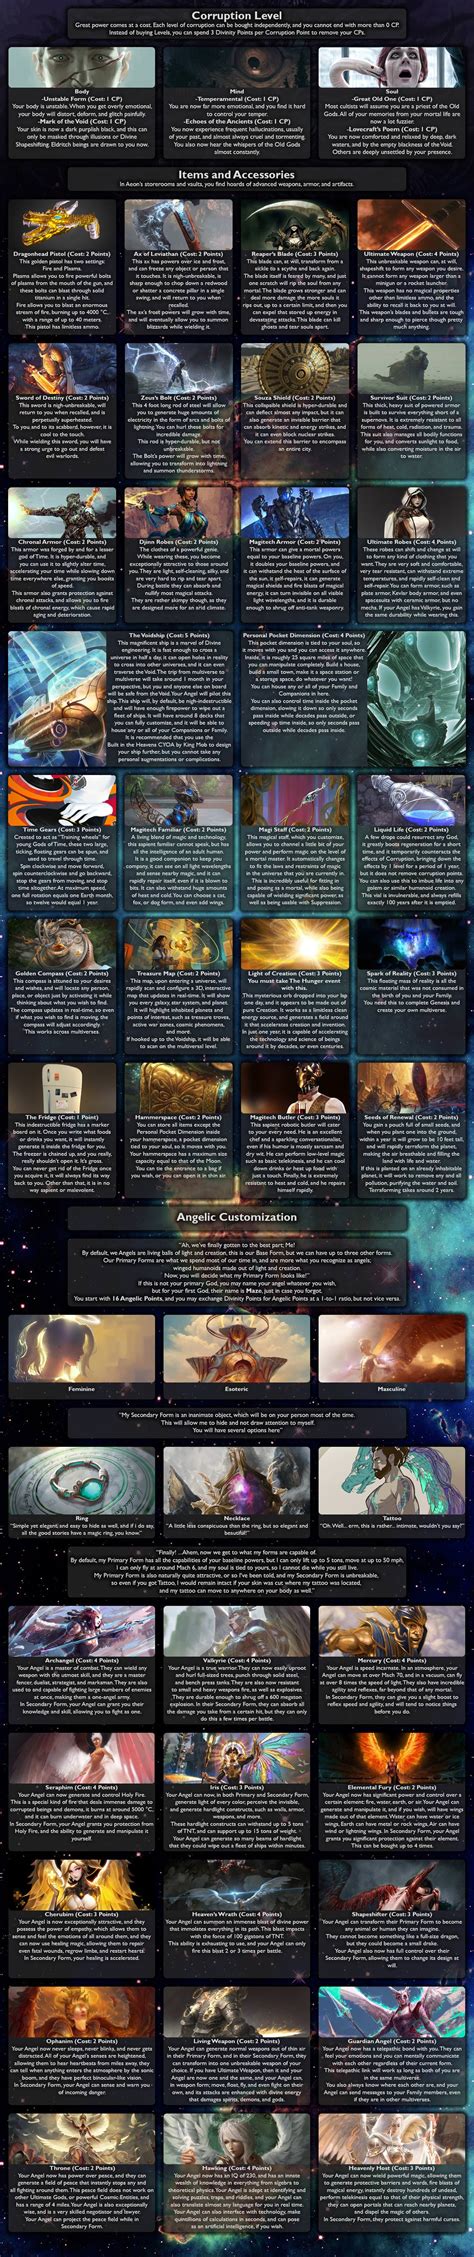 Eldritch Entity CYOA (by u/nxtub) Since it's been a while, here's a repost of the Eldritch Entity CYOA by Nxtub, reuploaded to Imgur for convenience sake. Titles: The Riotous Color, The God in Stolen Flesh, The Goddess of Delirium and Dreams, The Kindly Waif, The Maniac Pixie Nightmare Demon, Star Girl, Your Only Friend. Setting: Modern Day.. 